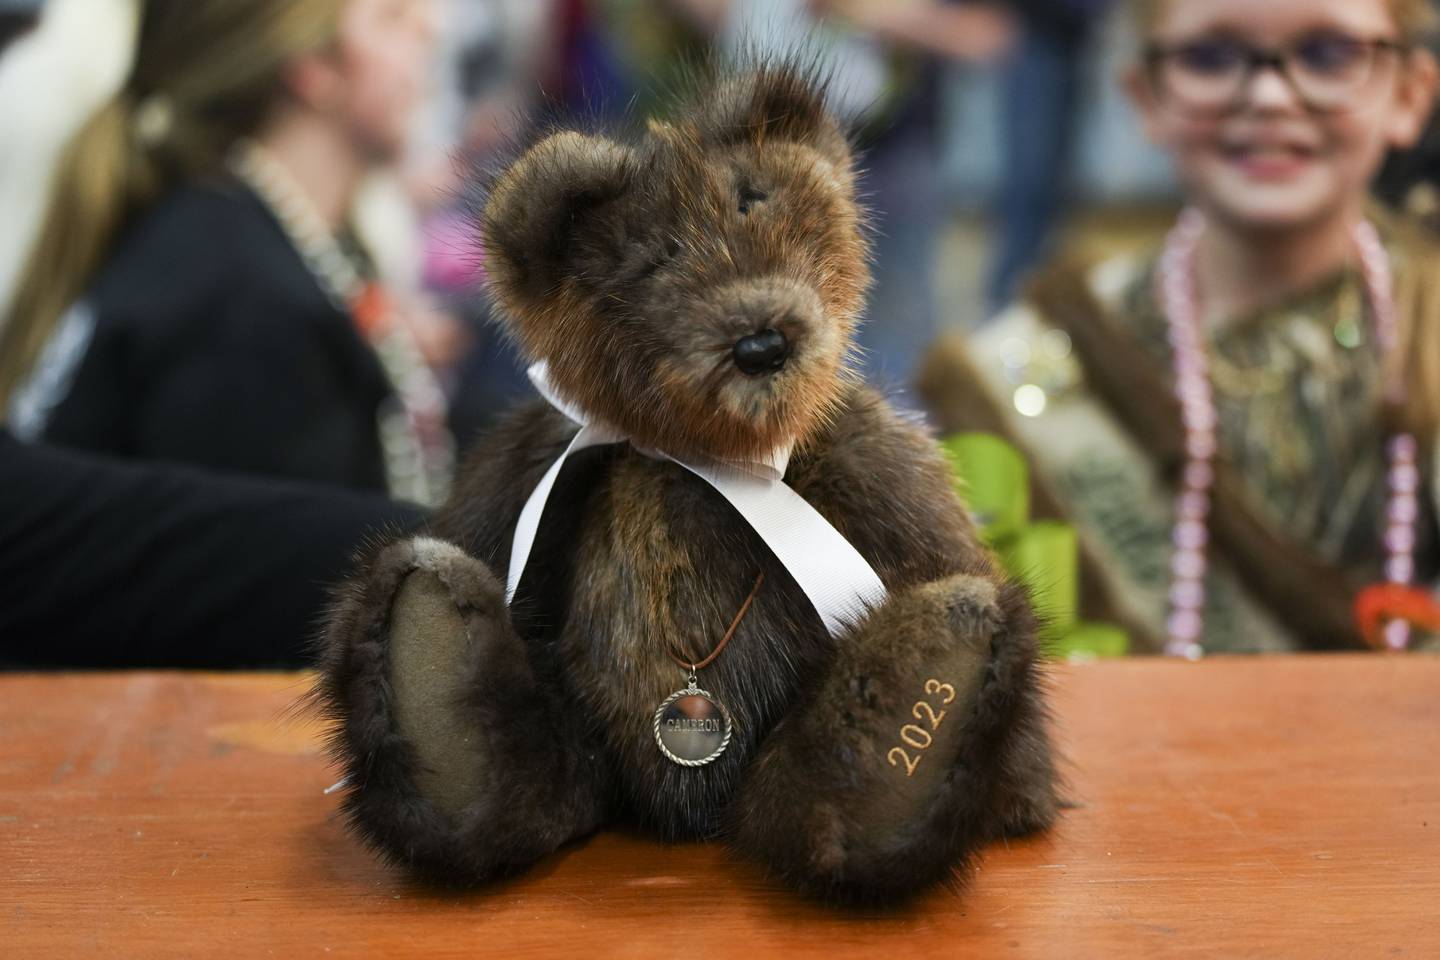 Each year a teddy bear made of muskrats is auctioned off at The National Outdoors Show. This year's bear fetched $2,000.